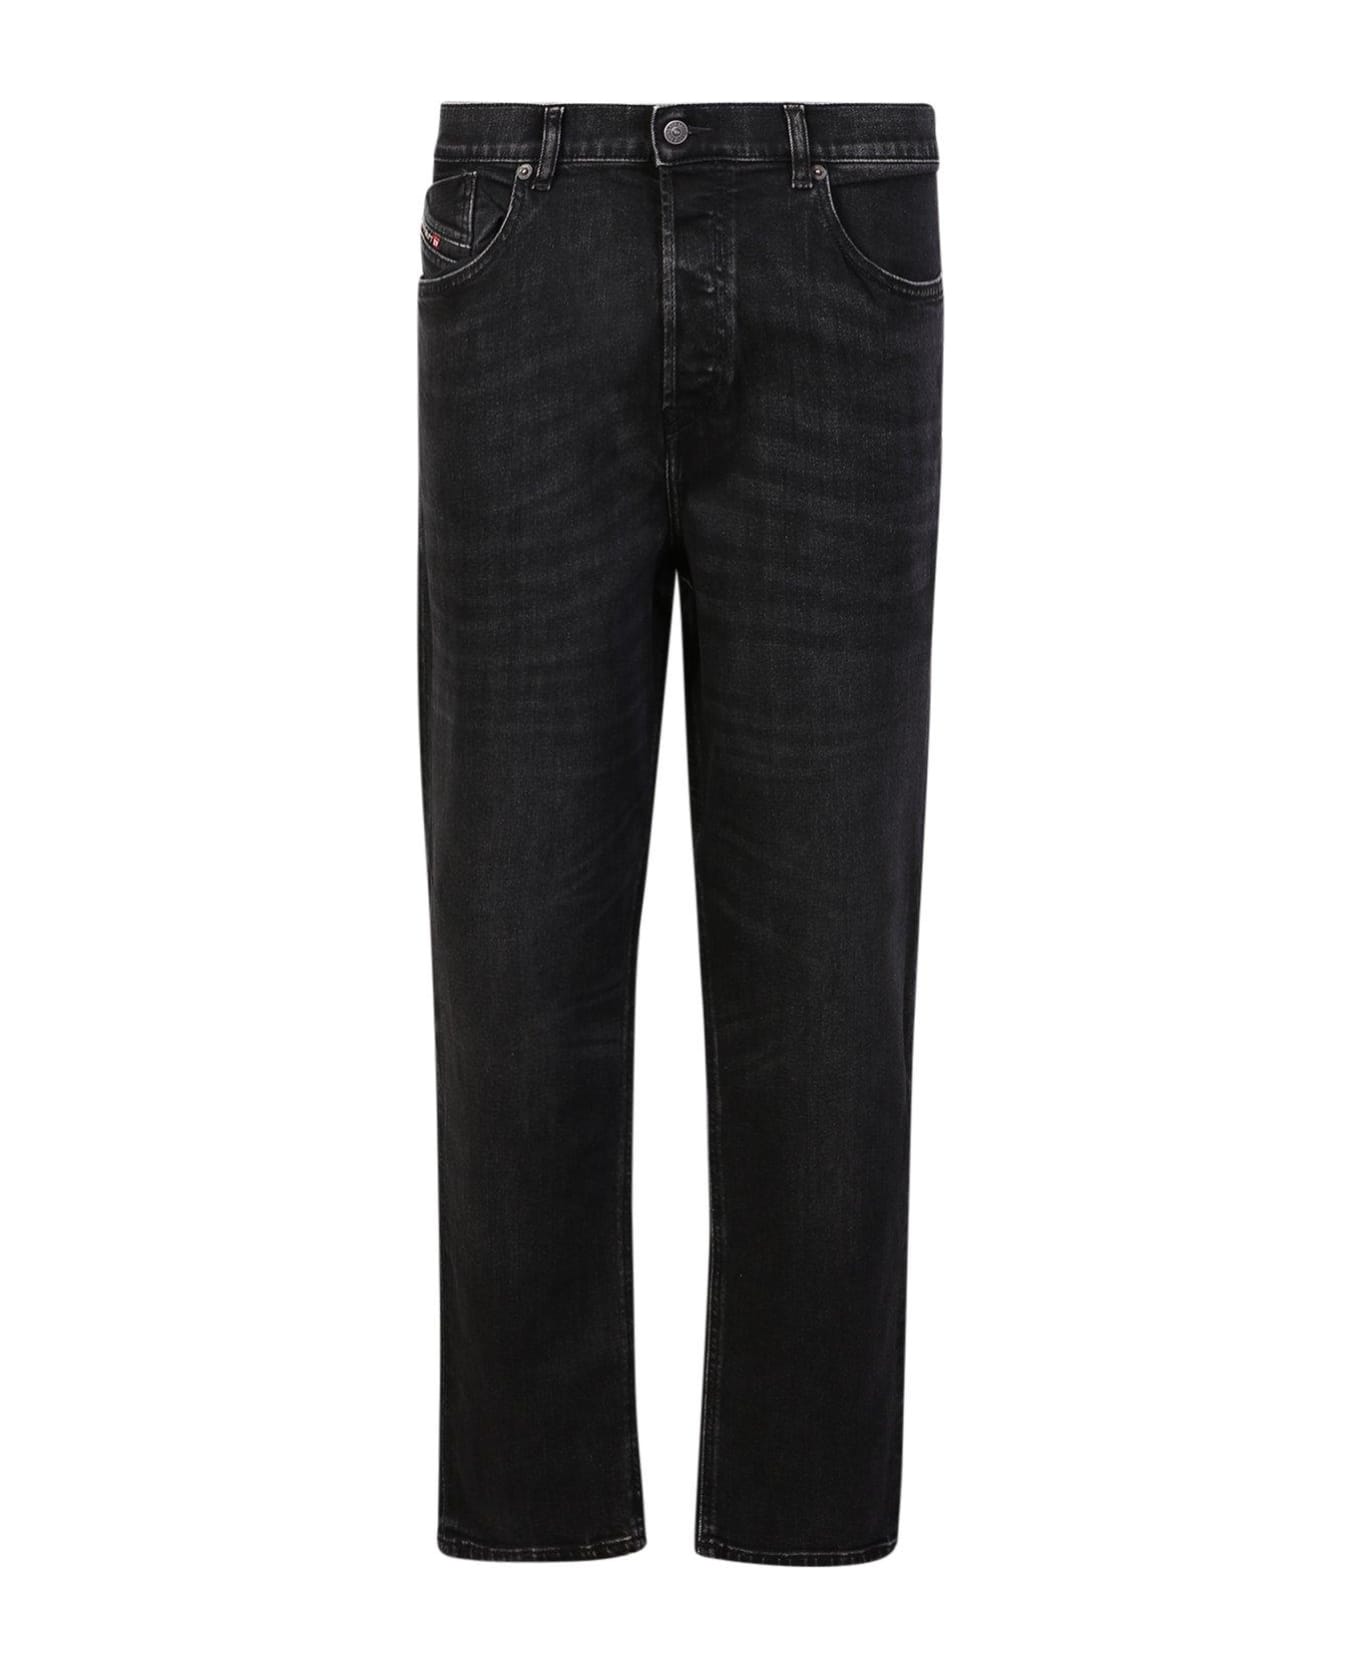 Diesel 2005 D-fining Tapered Jeans - BLUE